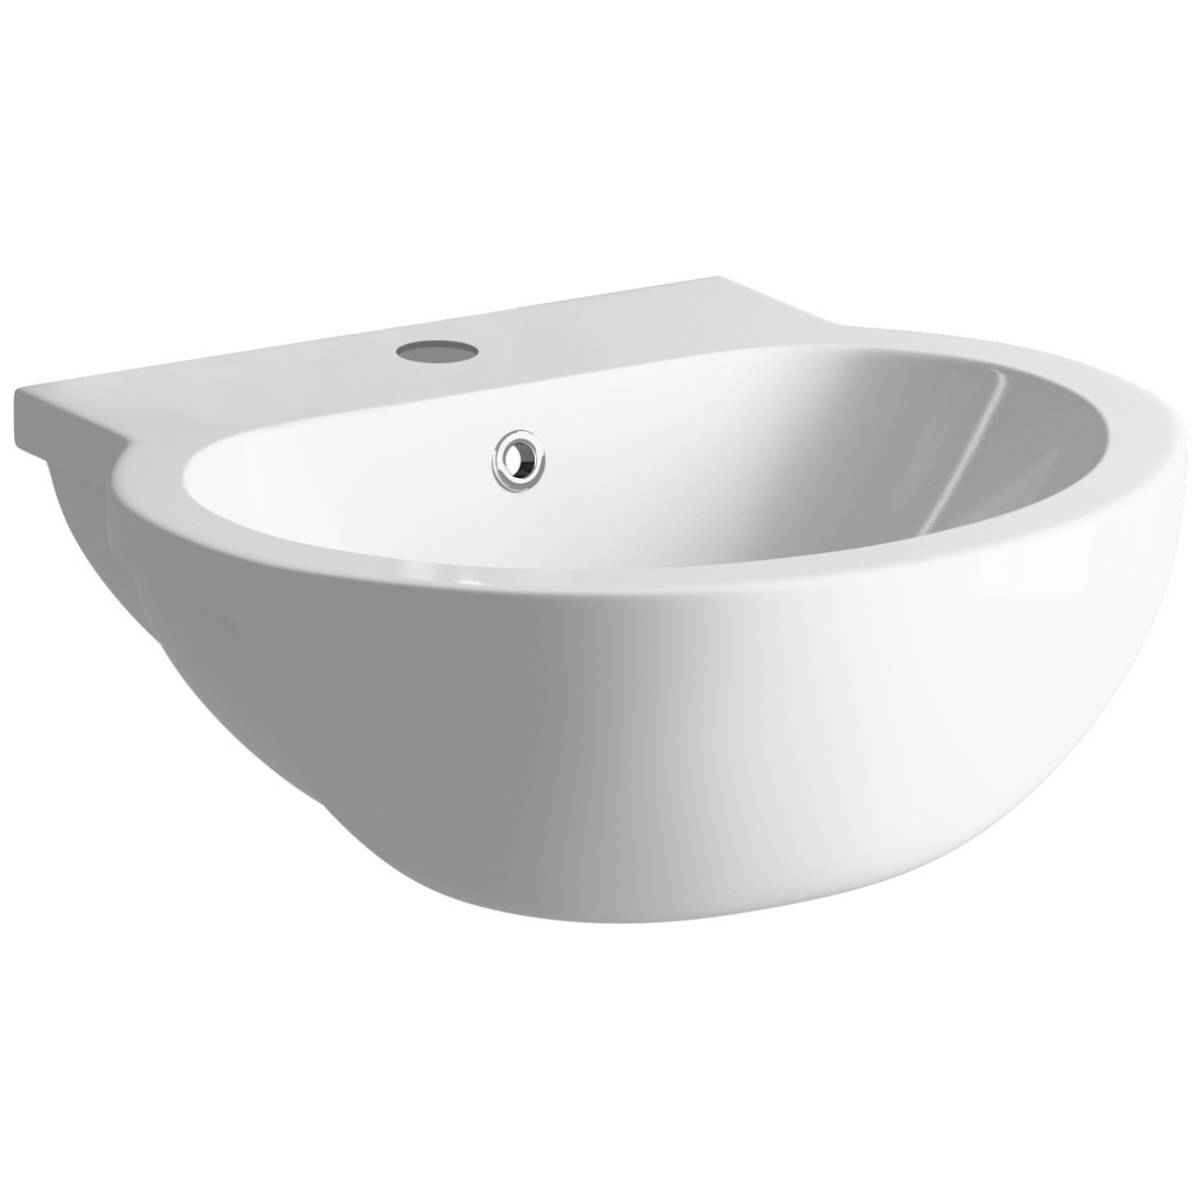 Moods Bathrooms to Love Mimosa 540mm Semi Recessed Basin (1183)